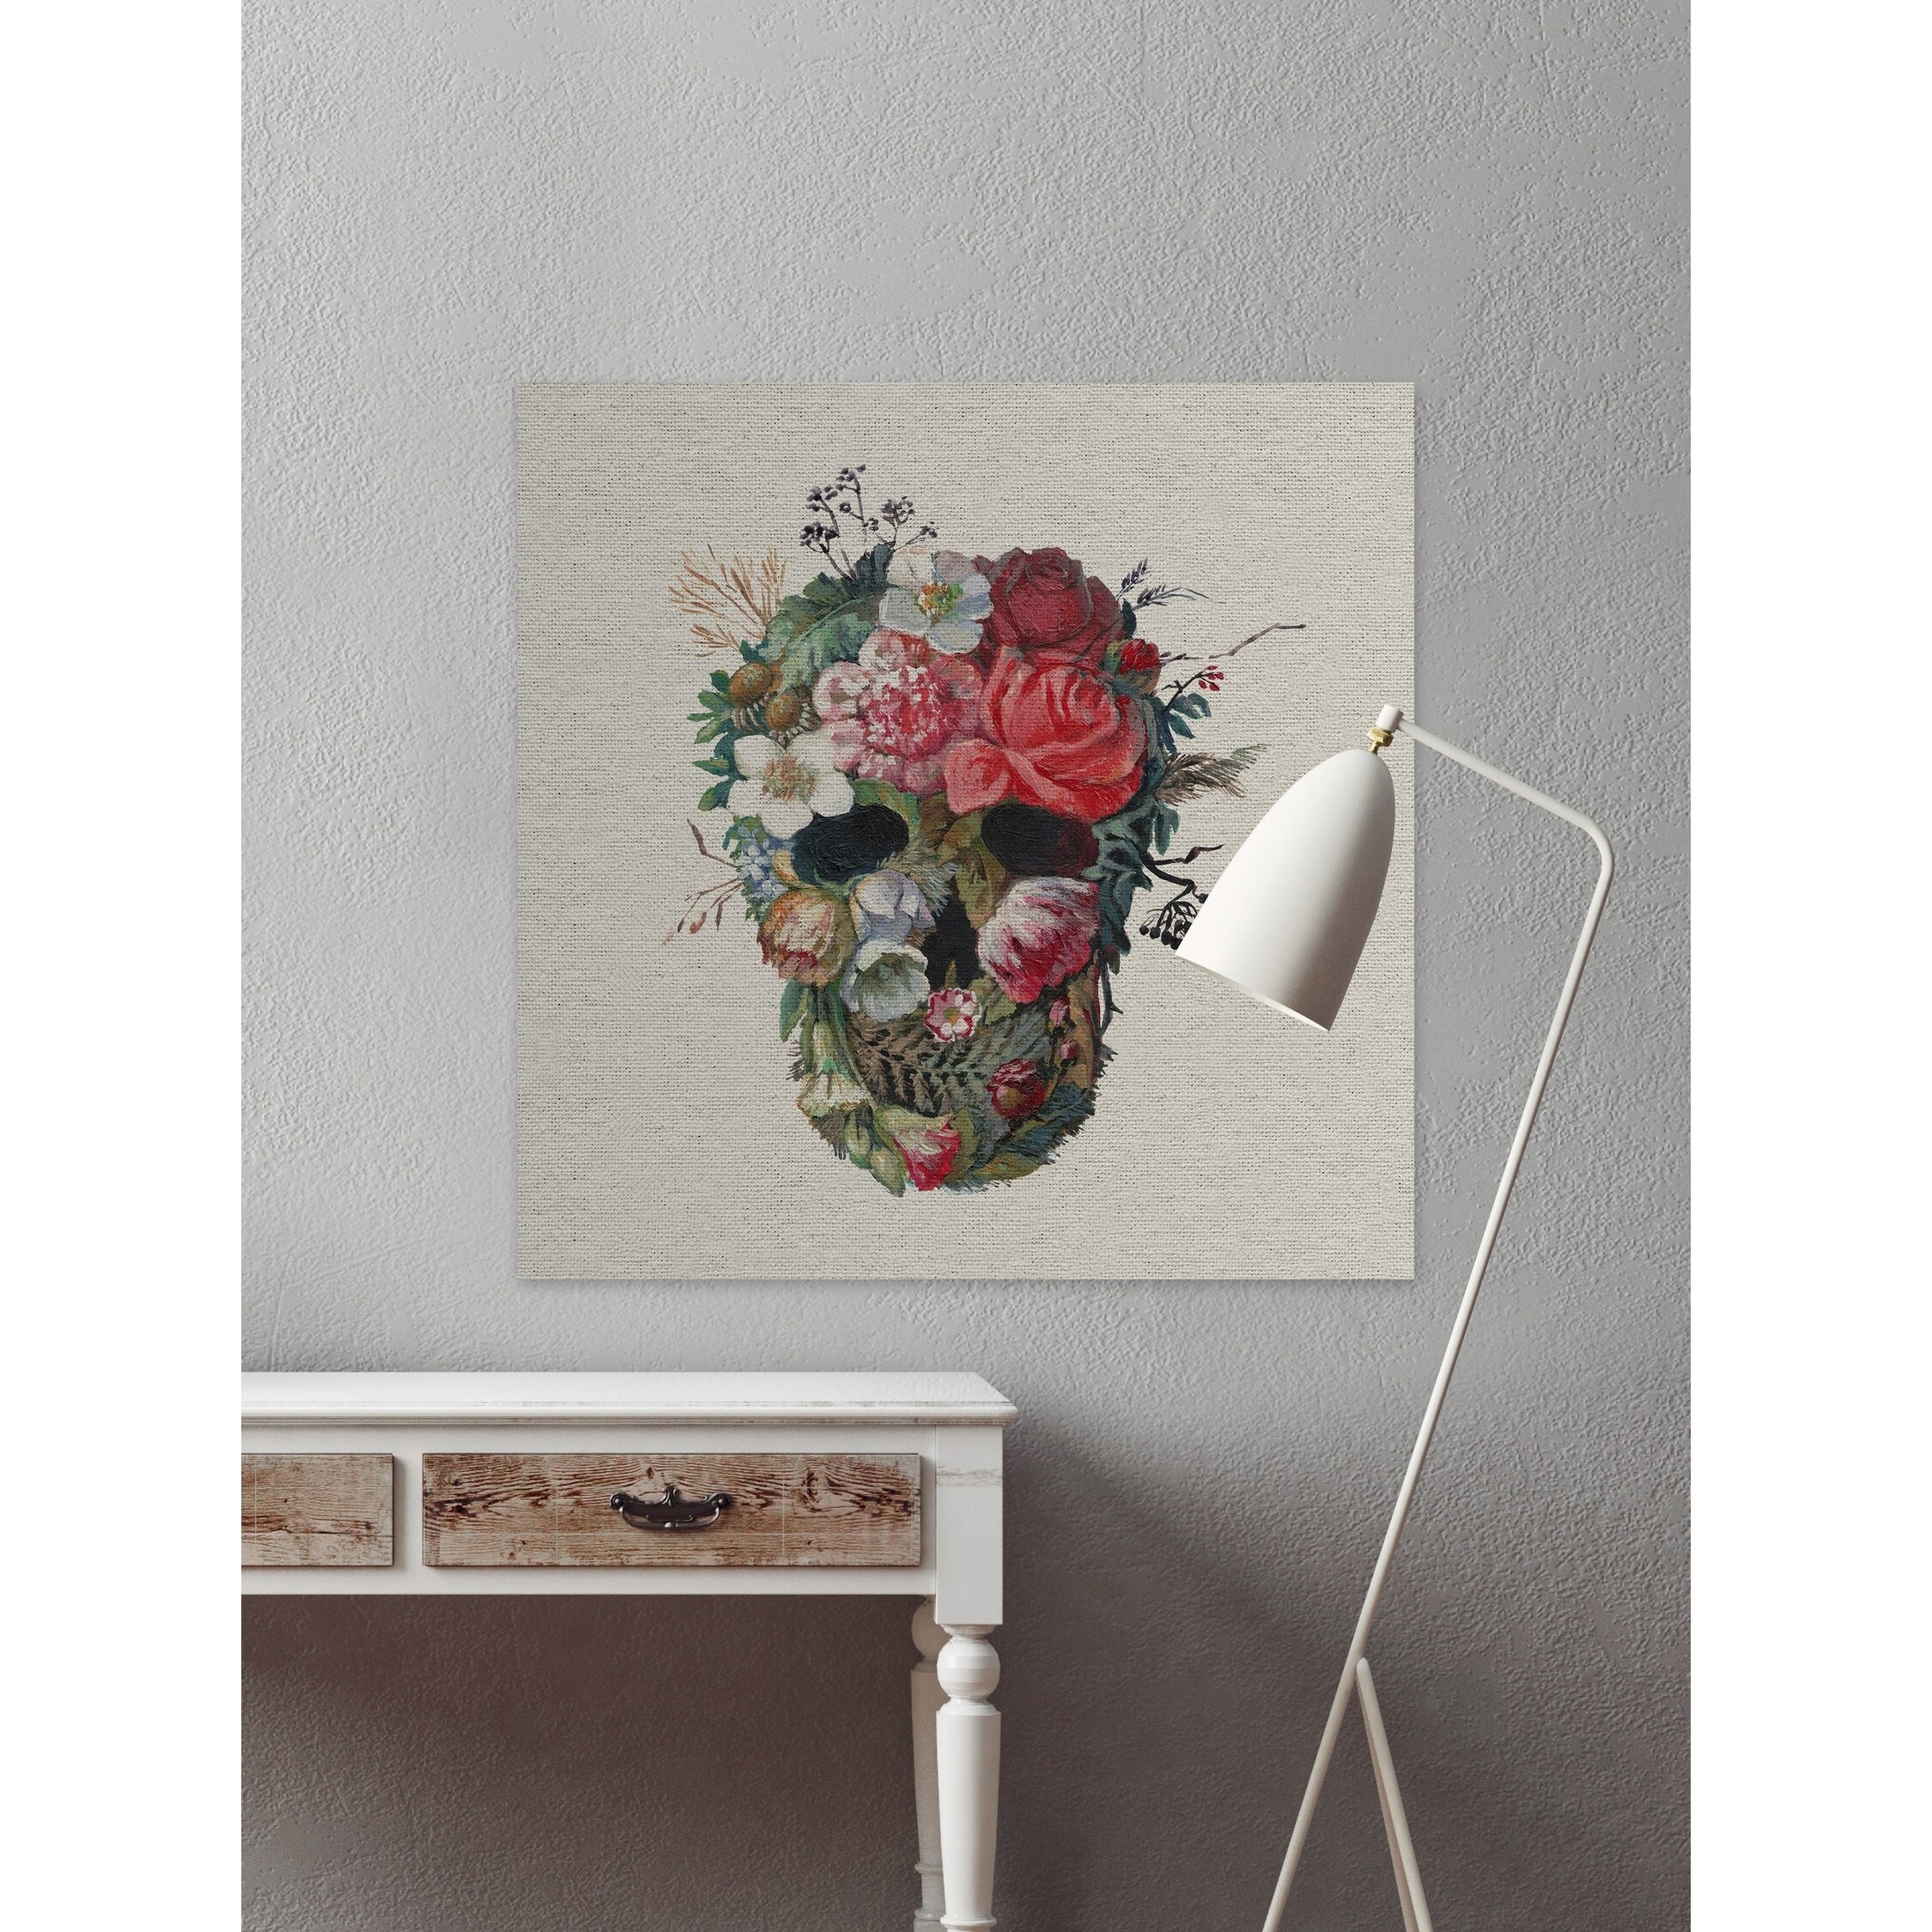 Crystal Flowers Solid-Faced Canvas Print